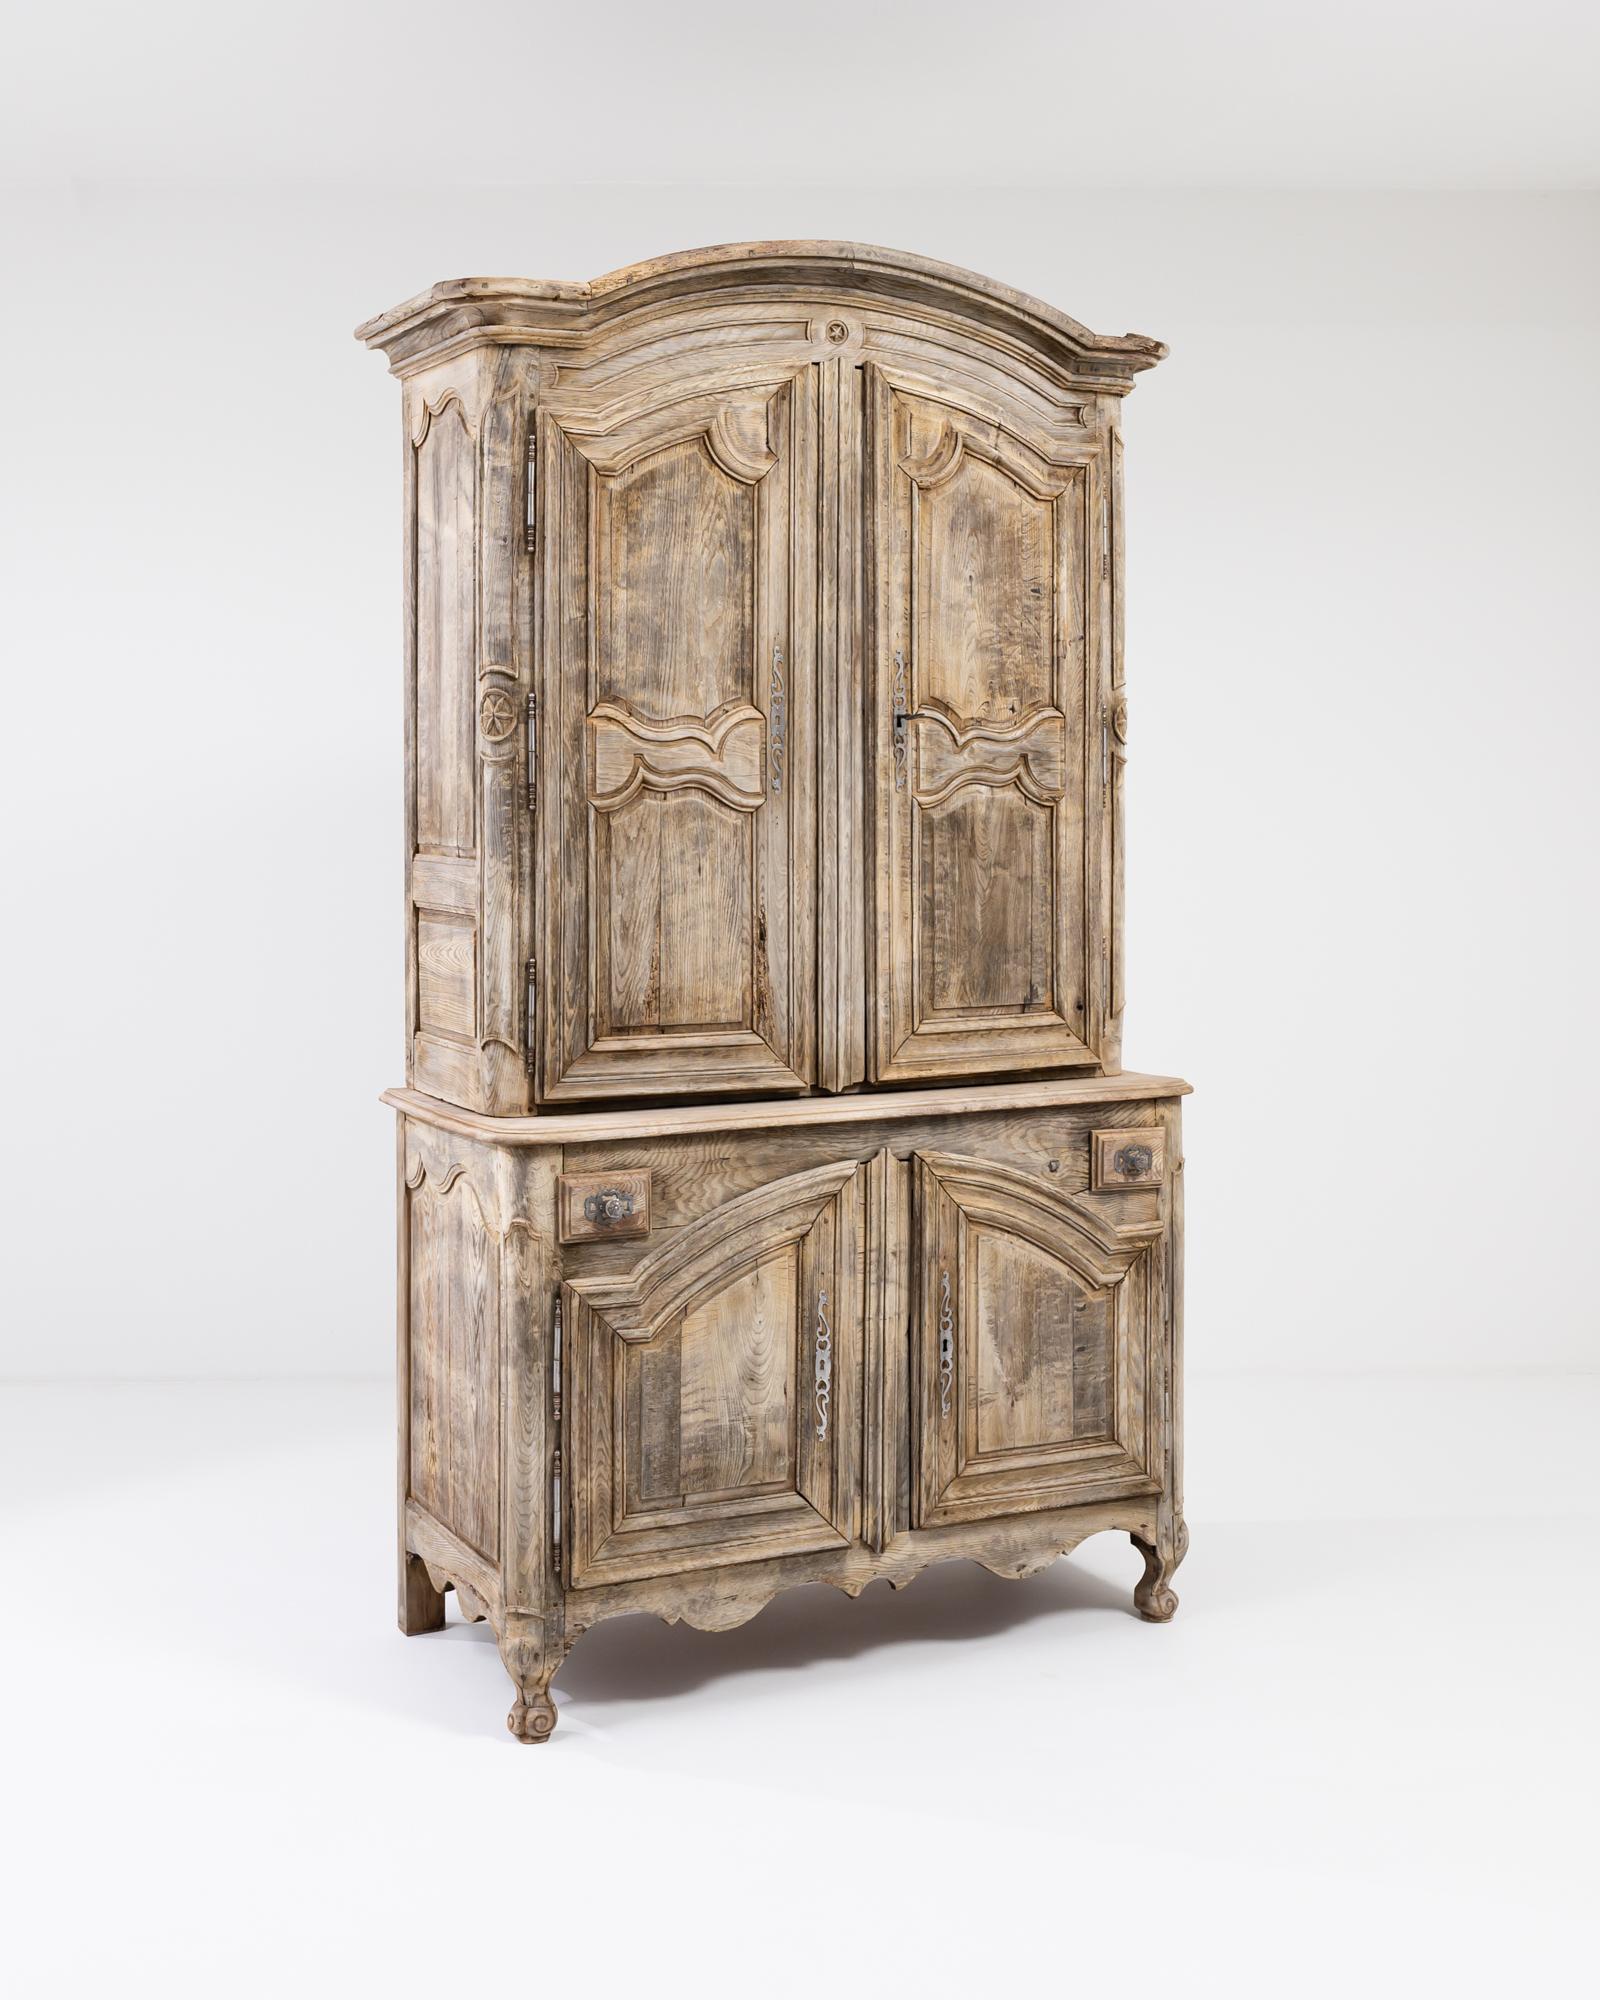 A wooden cabinet from 19th century France. This expansive cabinet is composed ‘a deux corps’ the upper and lower cabinets offering plenty of built-in shelves. The oak, which has been brought to new life in our atelier, was constructed with careful